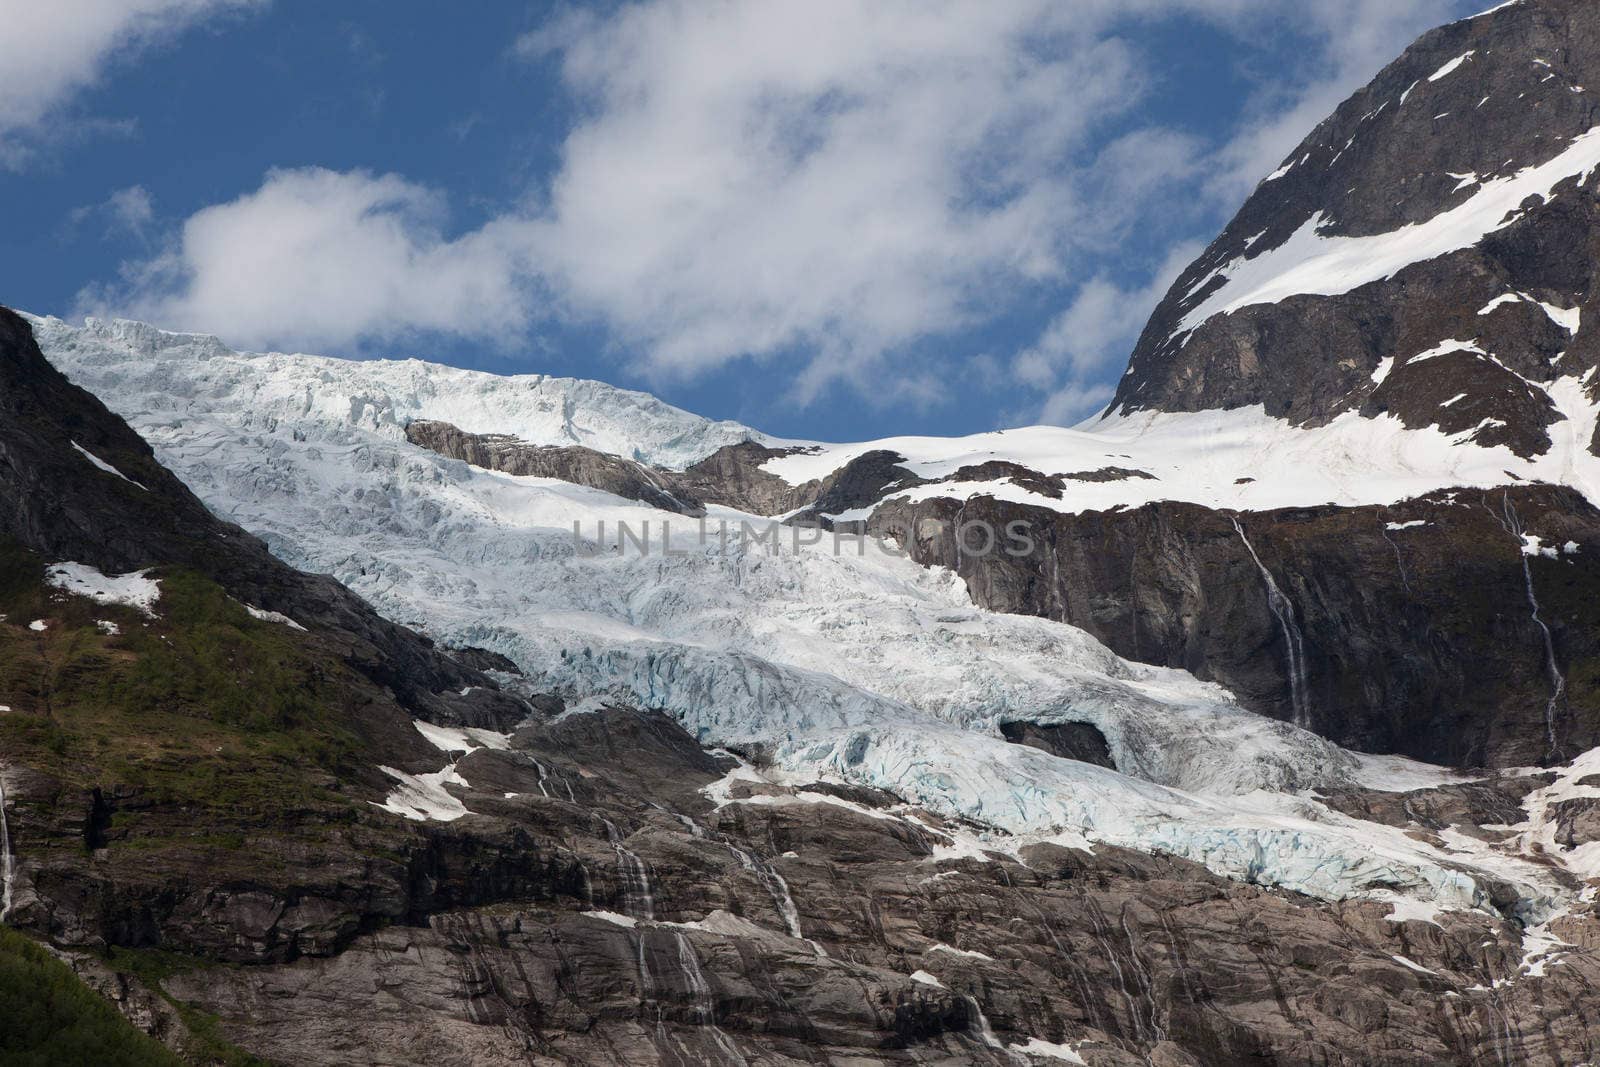 One of the many Norwegian glaciers